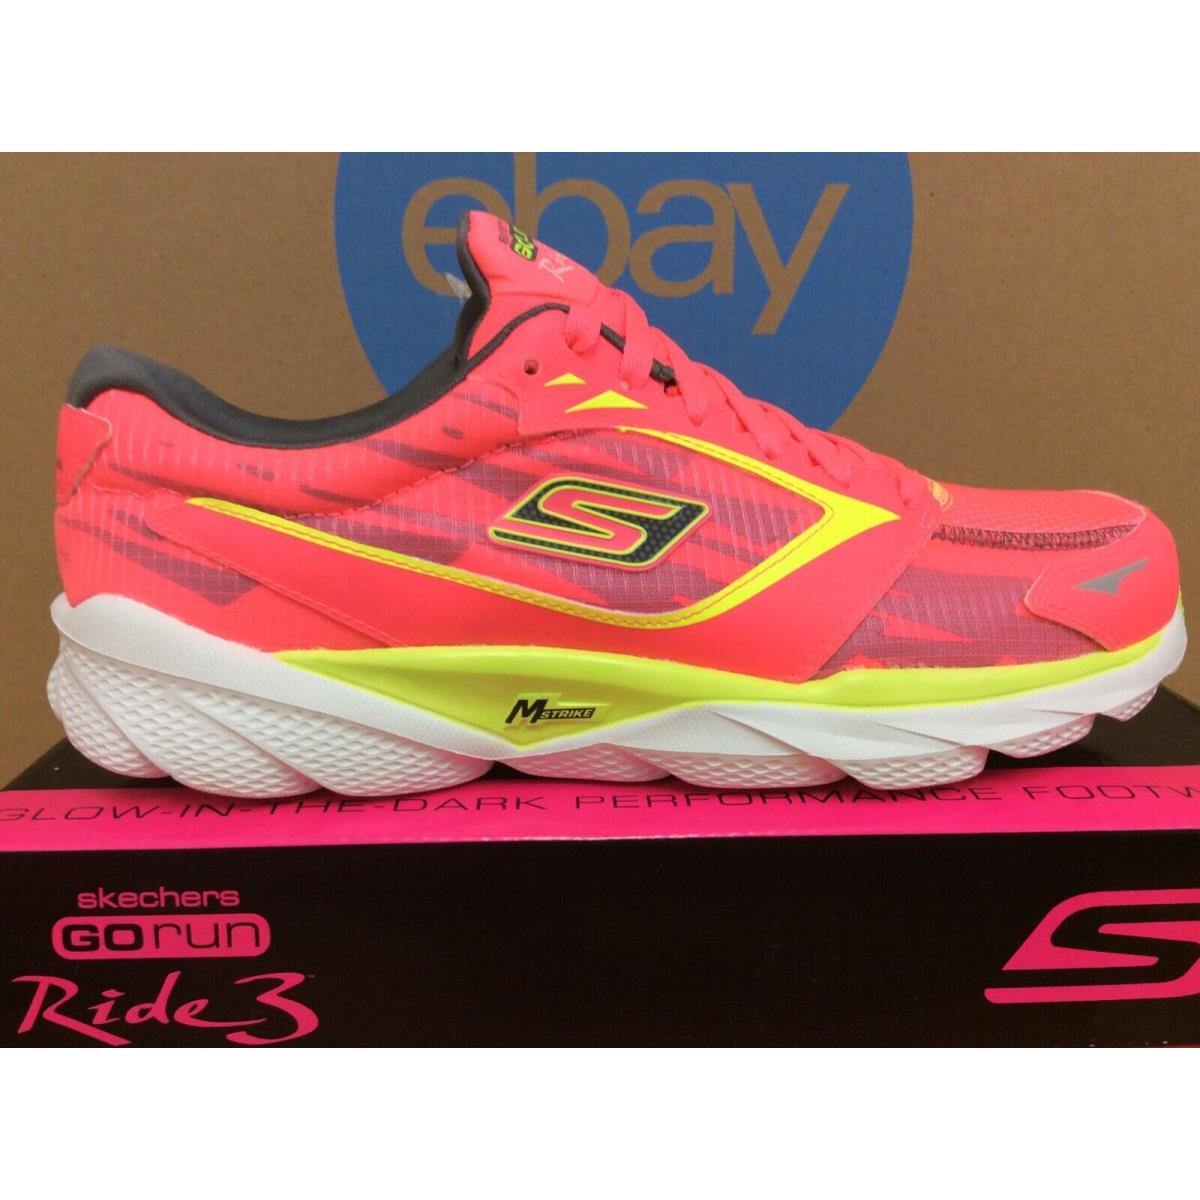 Skechers shoes  - Hot Pink Lime 6